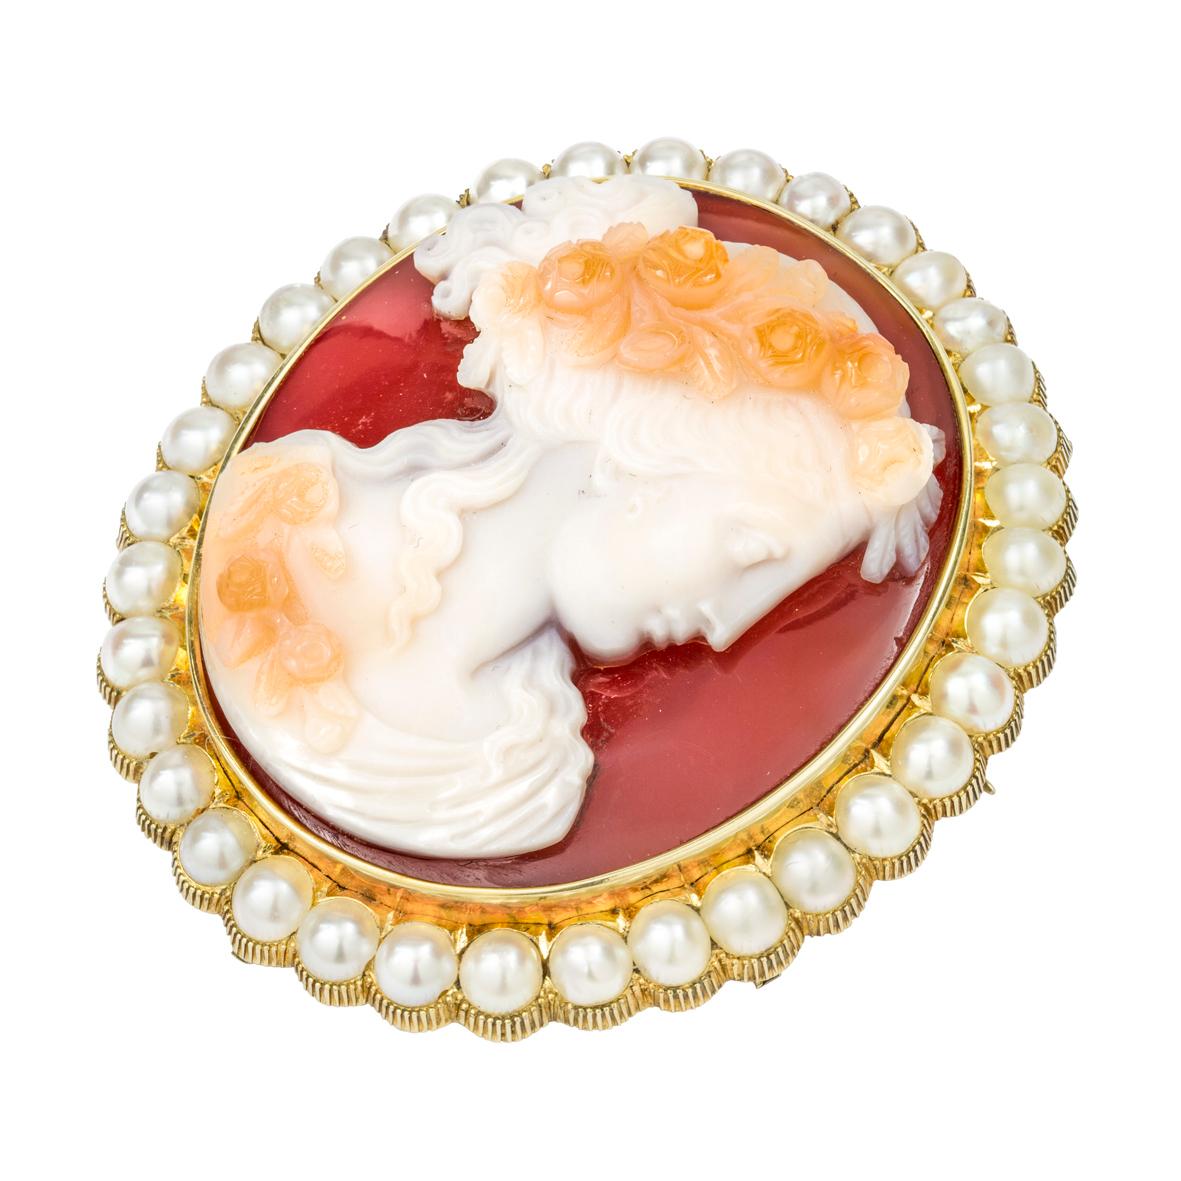 A Victorian hardstone cameo brooch, the hardstone cameo depicting a profile of lady in Roman style wearing rose wreath, surrounded by a thirty five pearls, all set in yellow gold mount with scalloped edges and brooch fitting, circa 1860, measuring